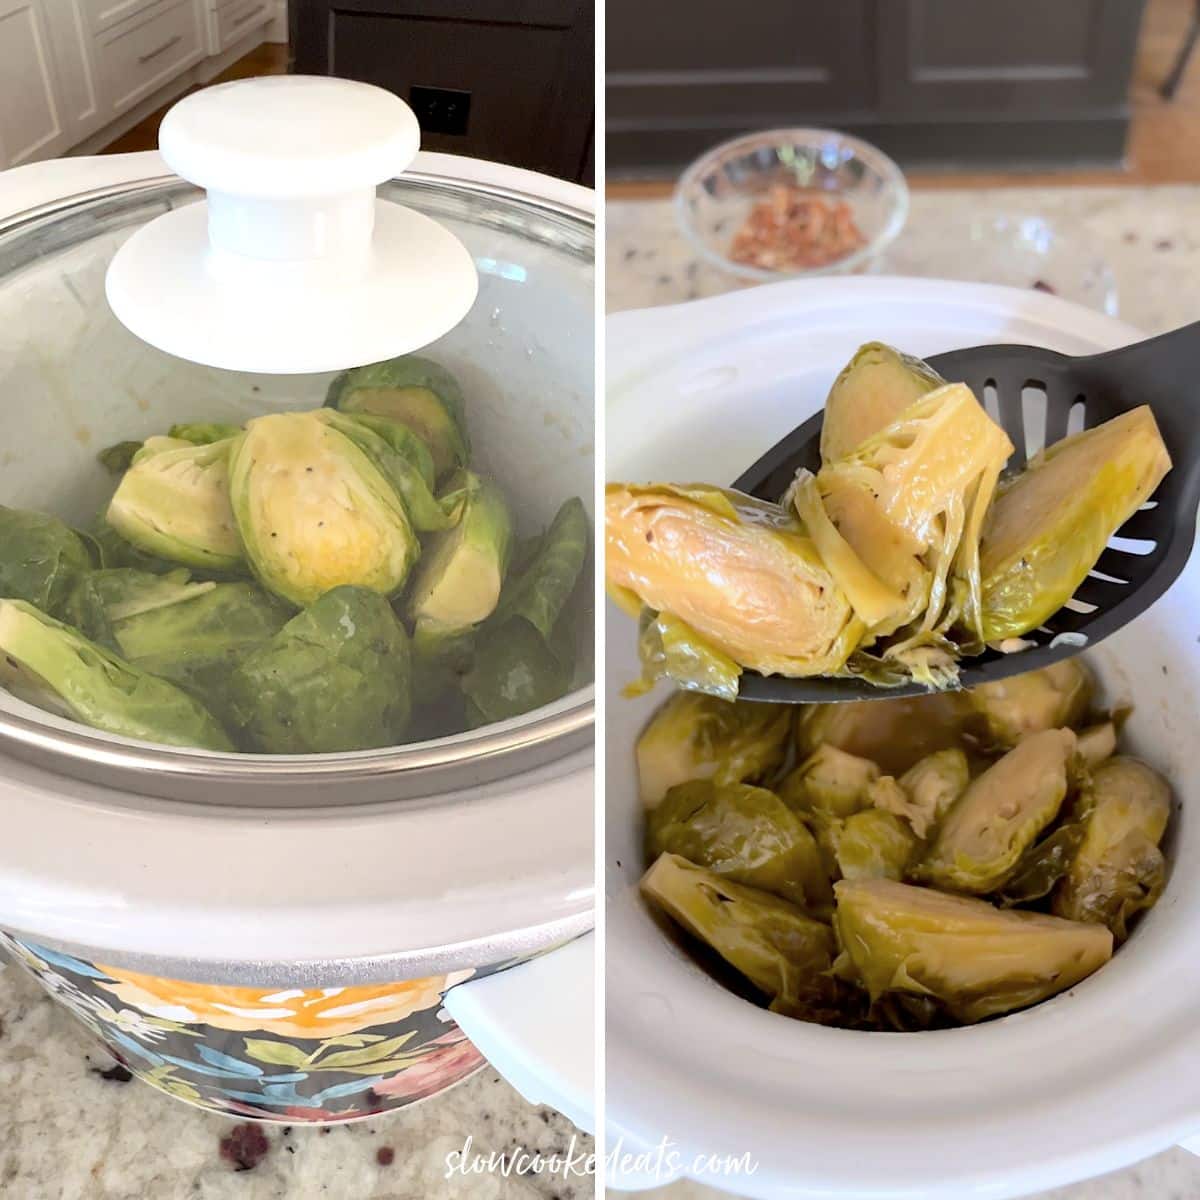 Slow cooking brussel sprouts in a white crockpot until tender.